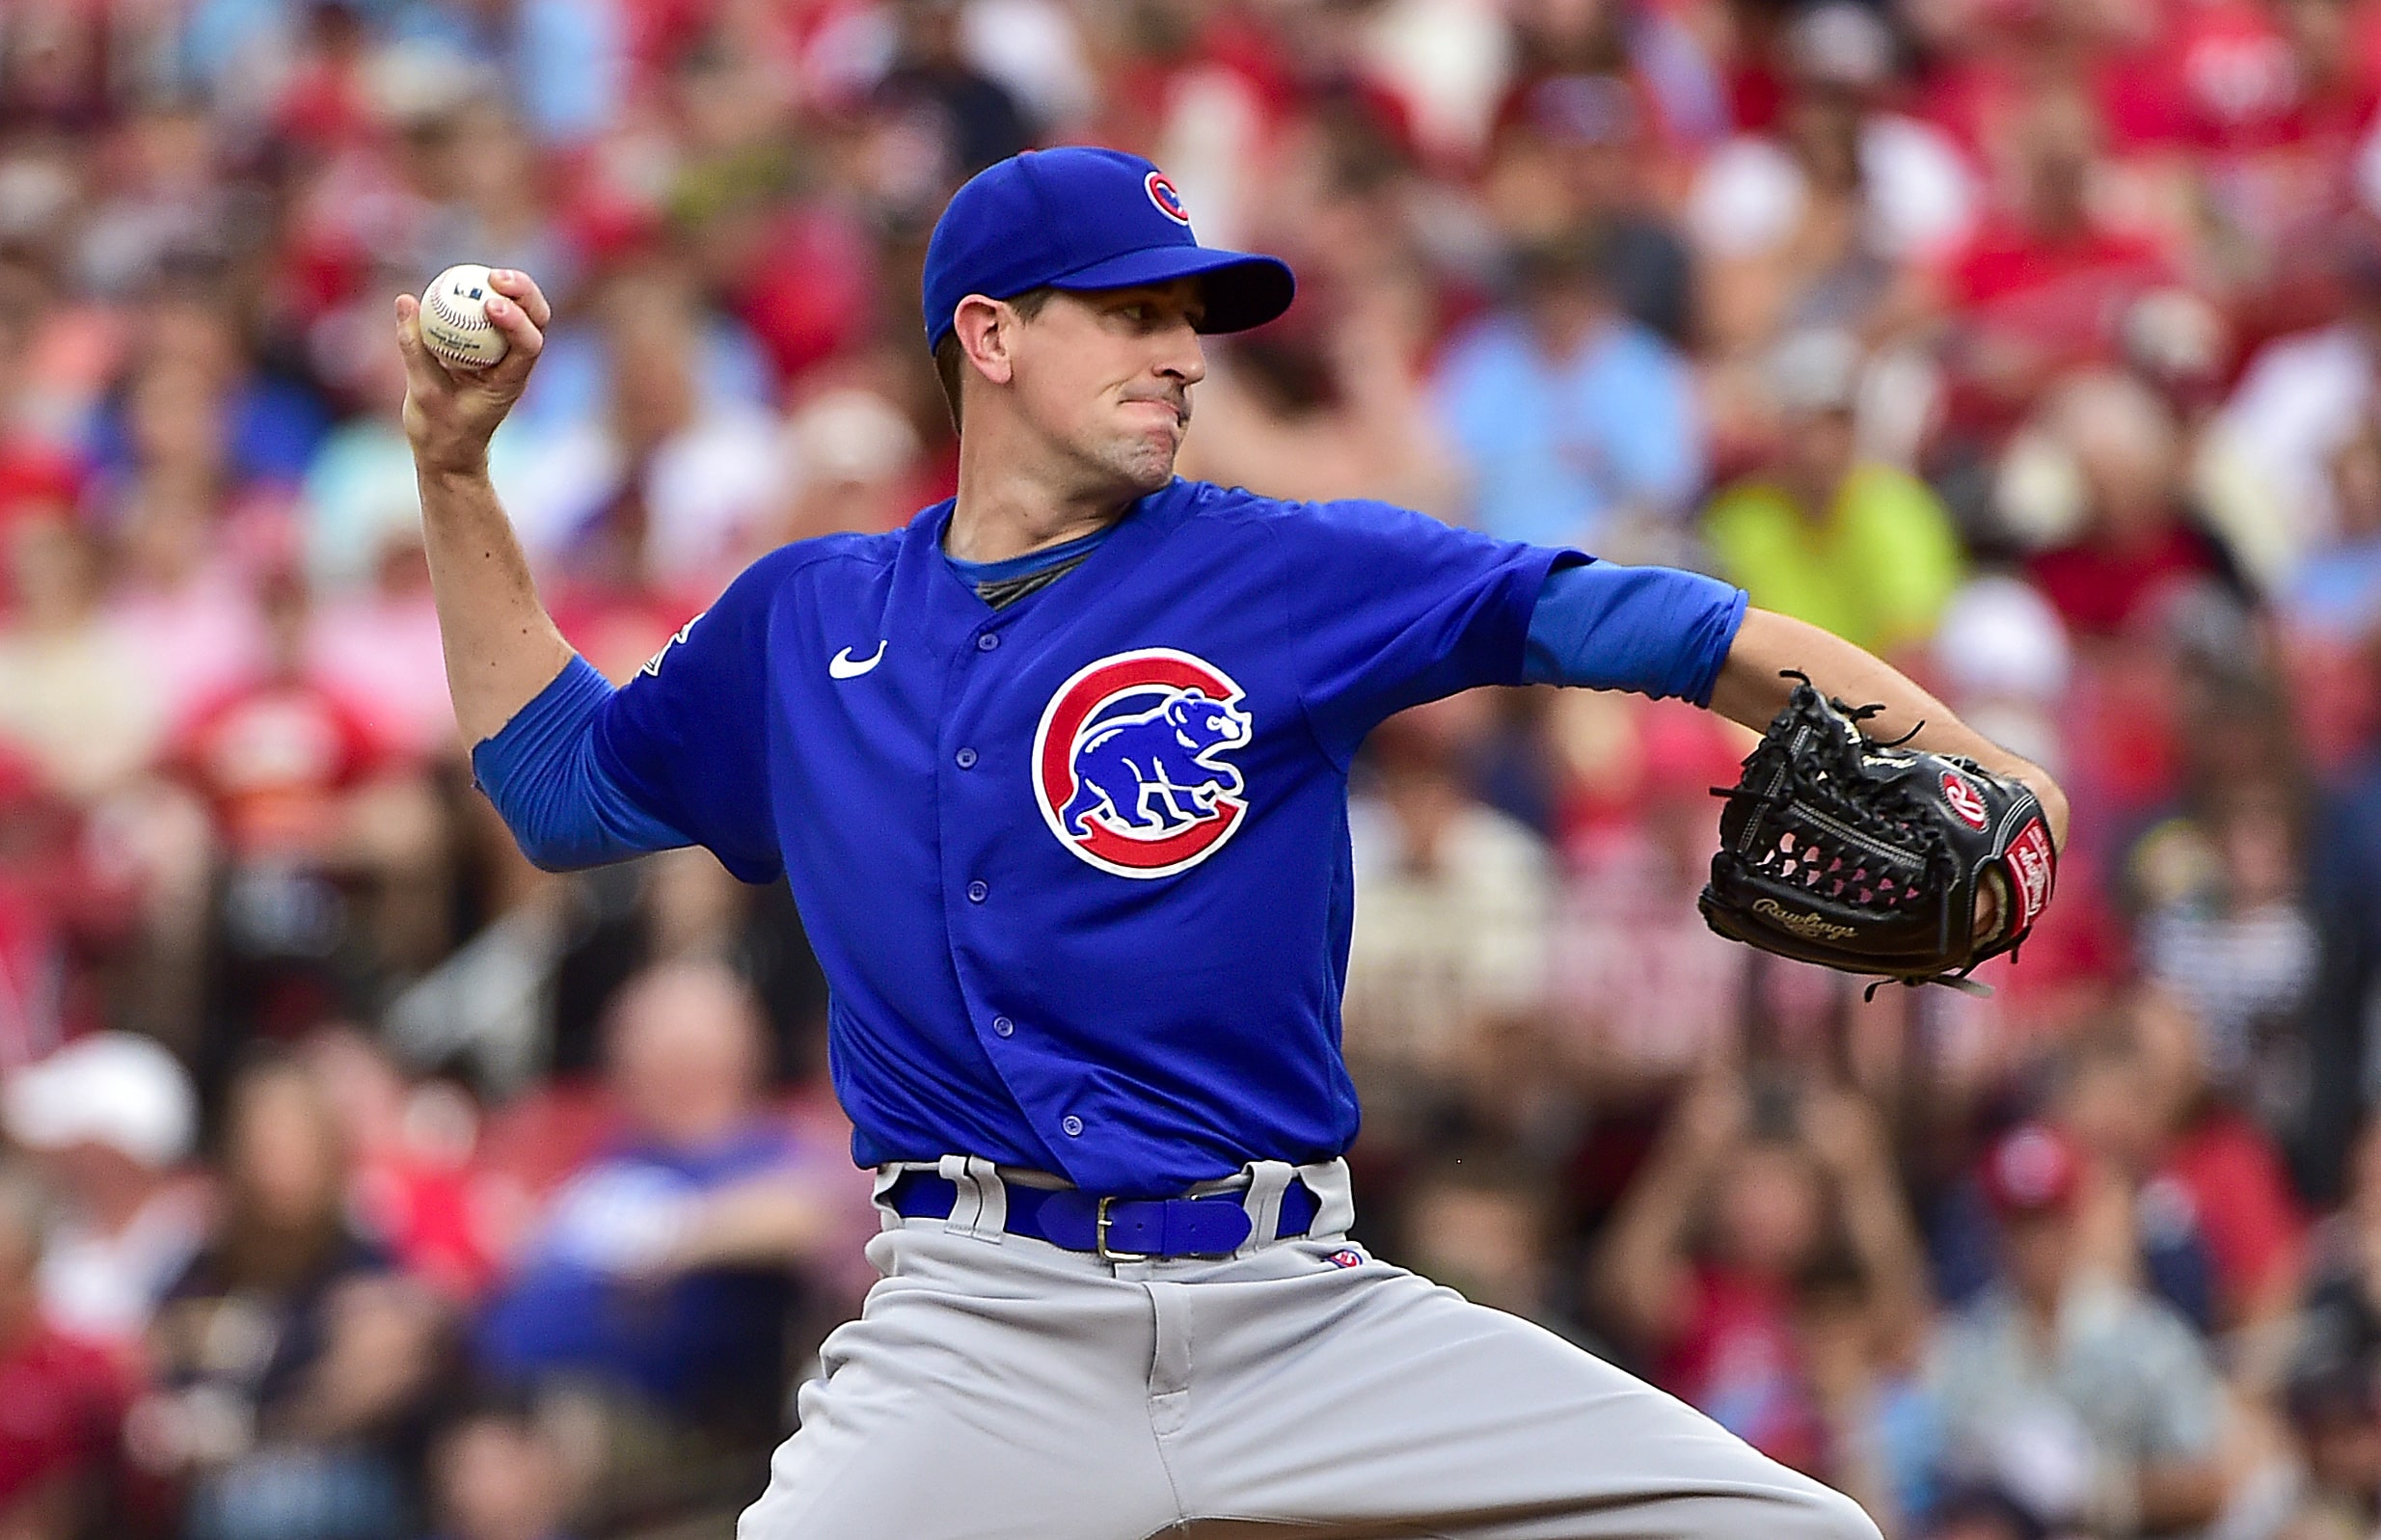 Jun 24, 2022; St. Louis, Missouri, USA; Chicago Cubs starting pitcher Kyle Hendricks (28) pitches against the St. Louis Cardinals during the first inning at Busch Stadium. Mandatory Credit: Jeff Curry-USA TODAY Sports